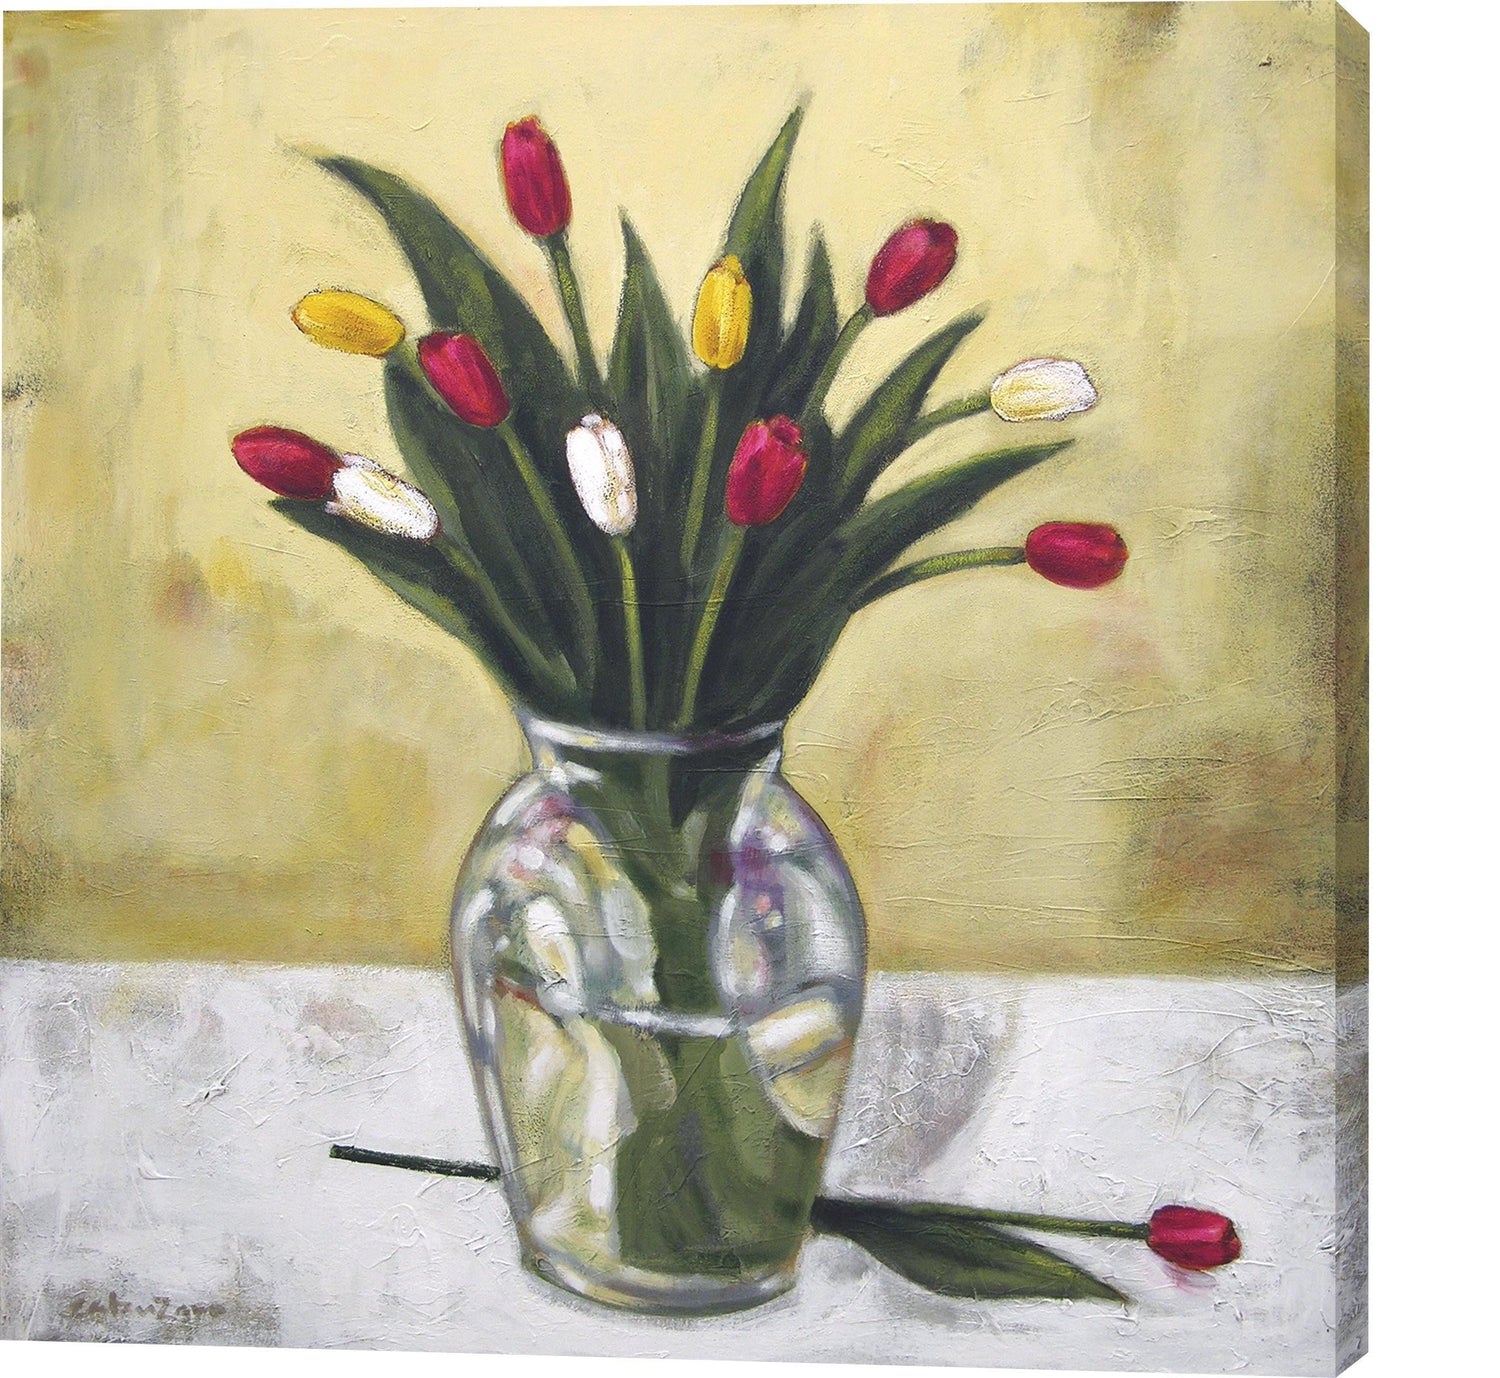 Floral Canvas Print - "Tulips from the Garden"